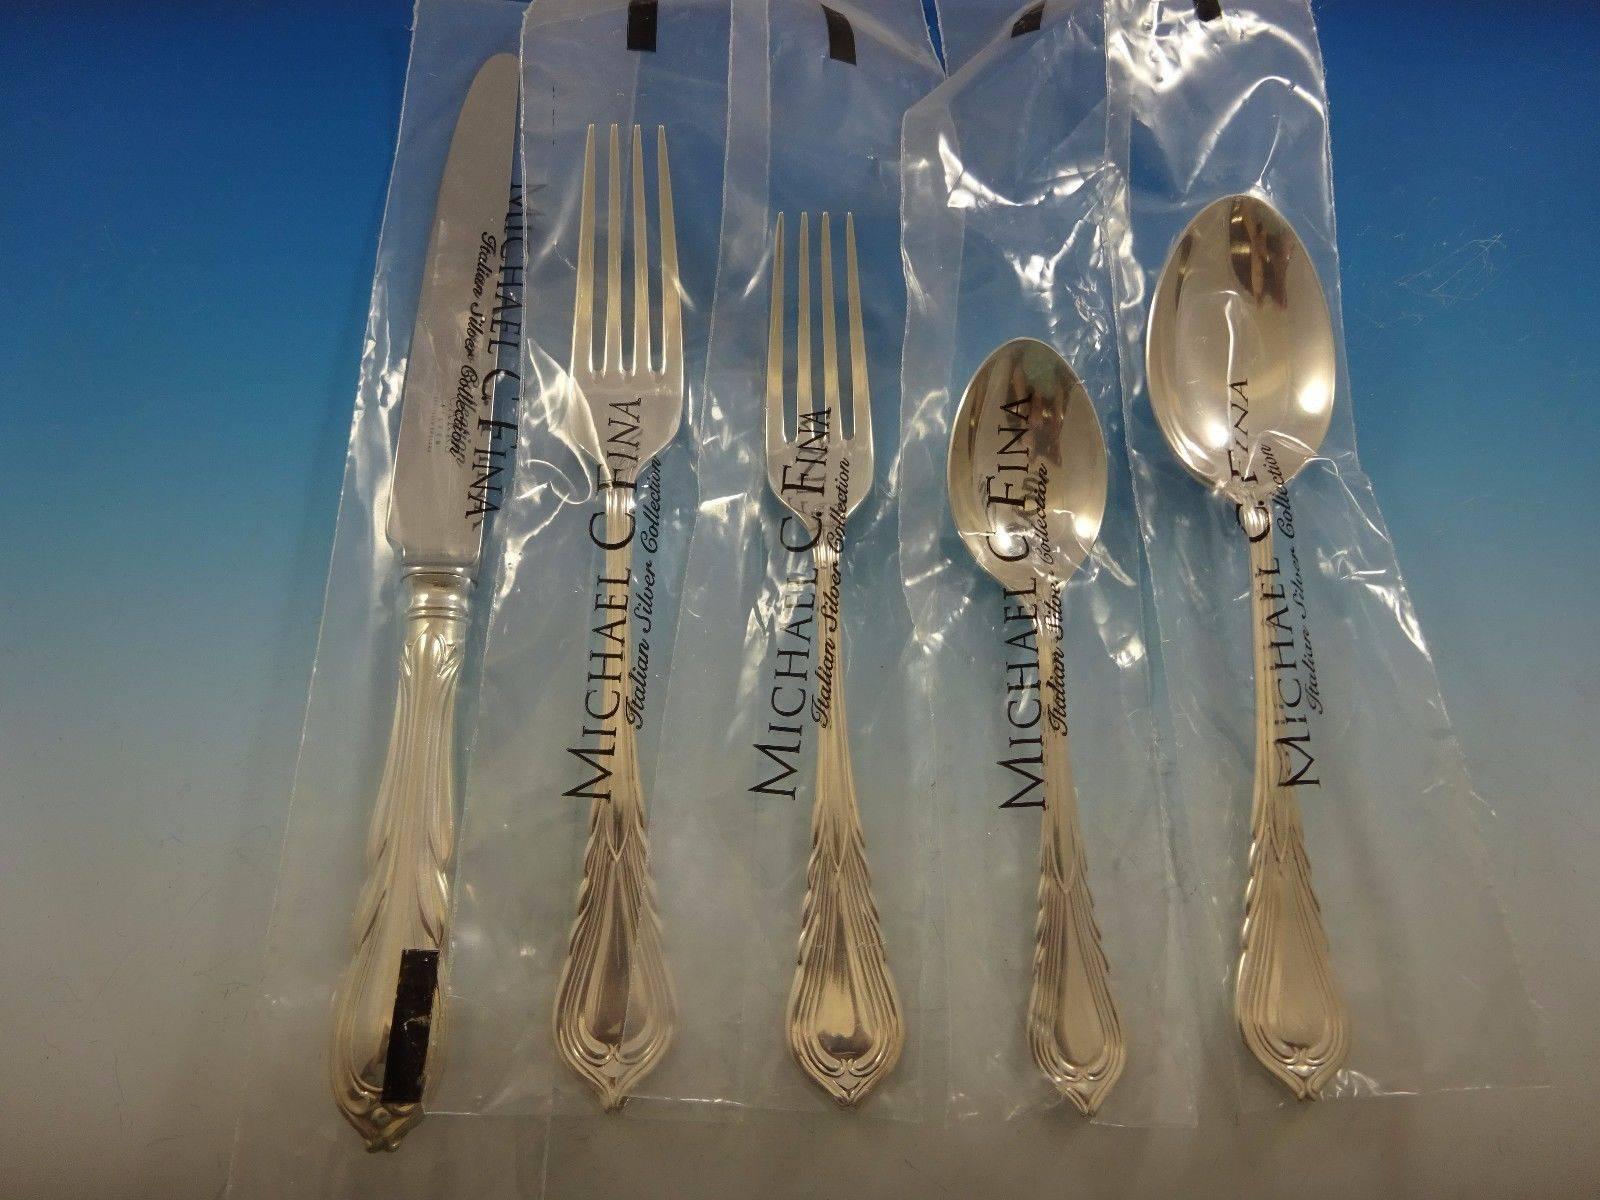 Carrs silver is the premier brand of sterling silver cutlery in Britain. This beautiful design was created in 1850, inspired by the elegance of the lily. The design seems to anticipate the Art Nouveau styling of the early 20th century with its bold